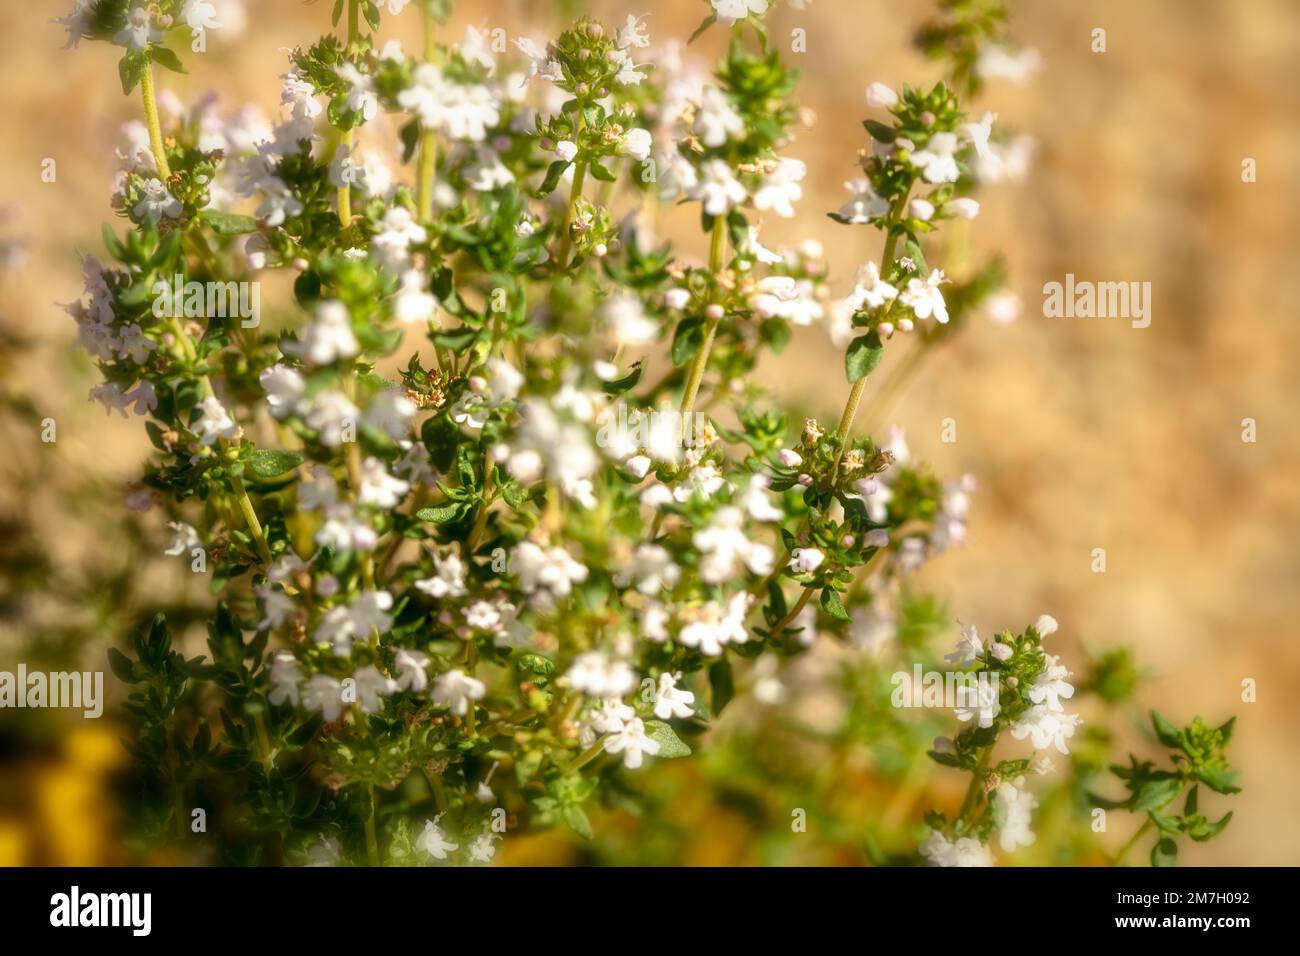 Natural close-up food ingredient of garden Thyme in flower Stock Photo